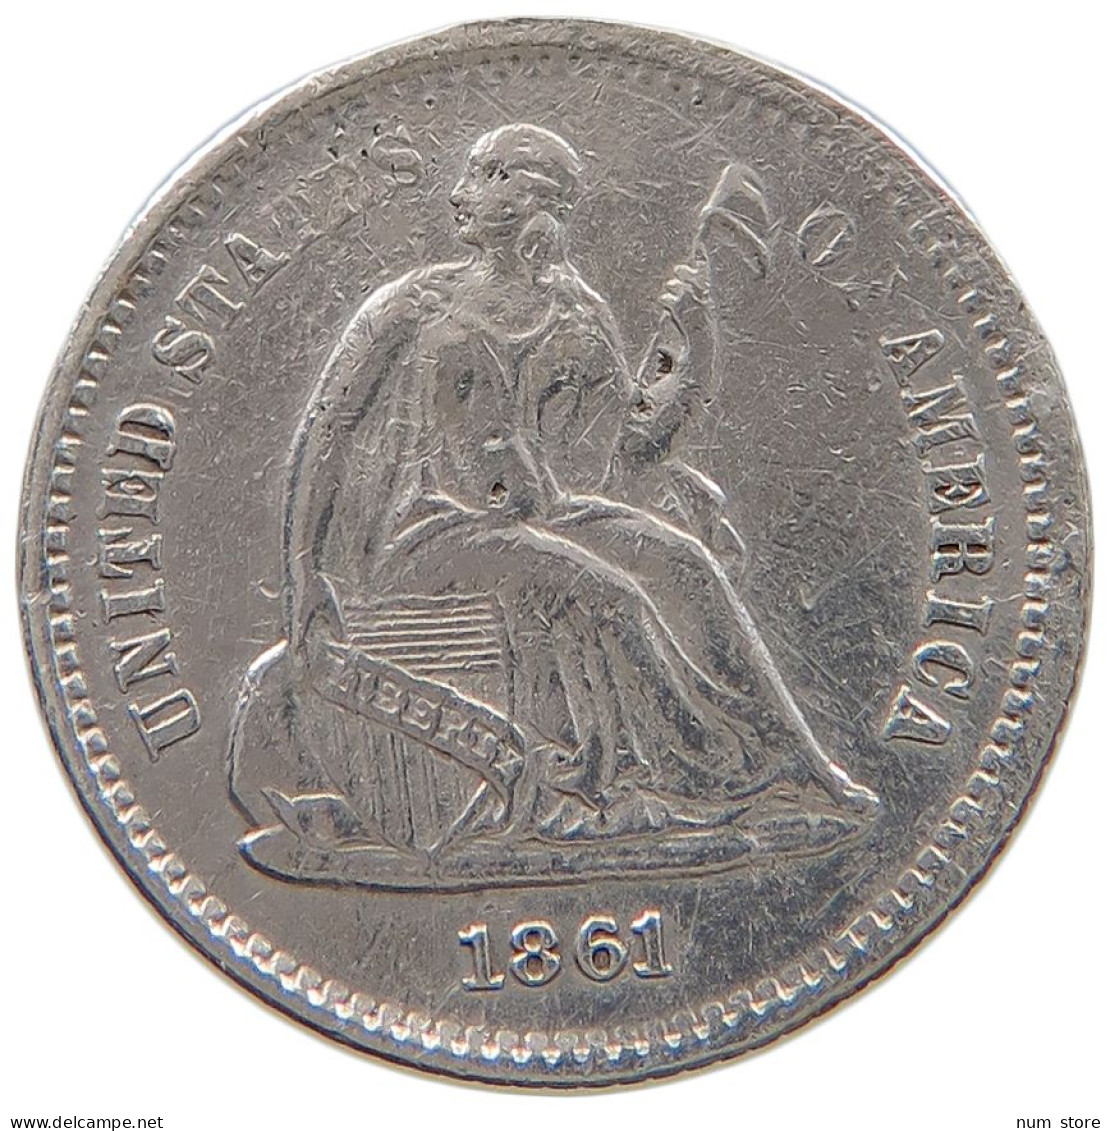 UNITED STATES OF AMERICA HALF DIME 1861 SEATED LIBERTY ENGRAVED #t156 0521 - Half Dimes